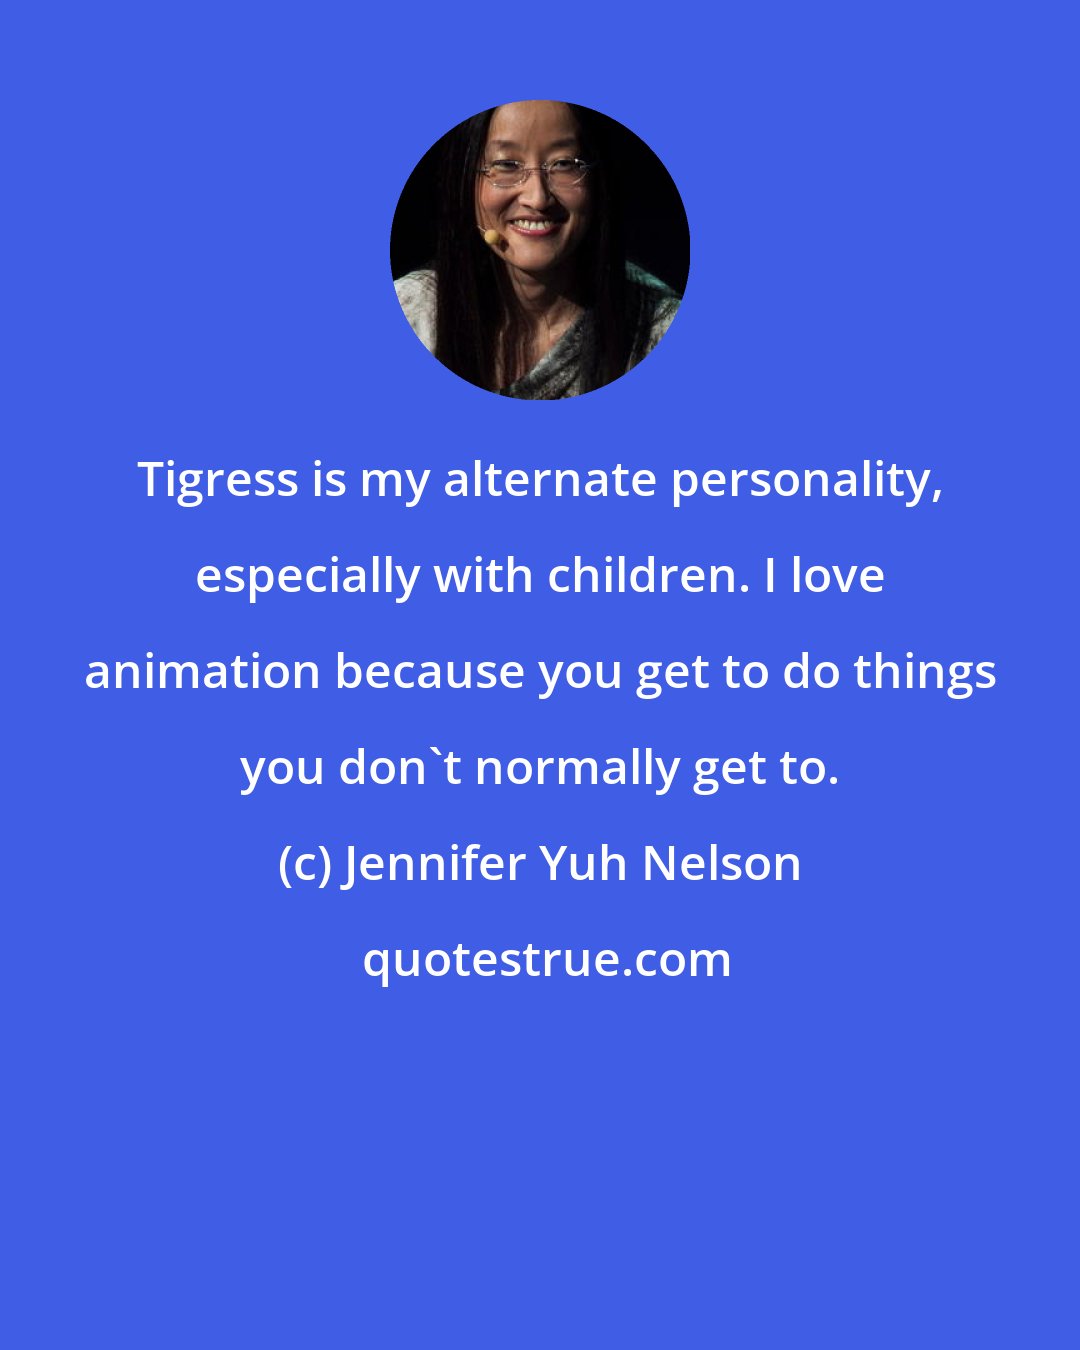 Jennifer Yuh Nelson: Tigress is my alternate personality, especially with children. I love animation because you get to do things you don't normally get to.